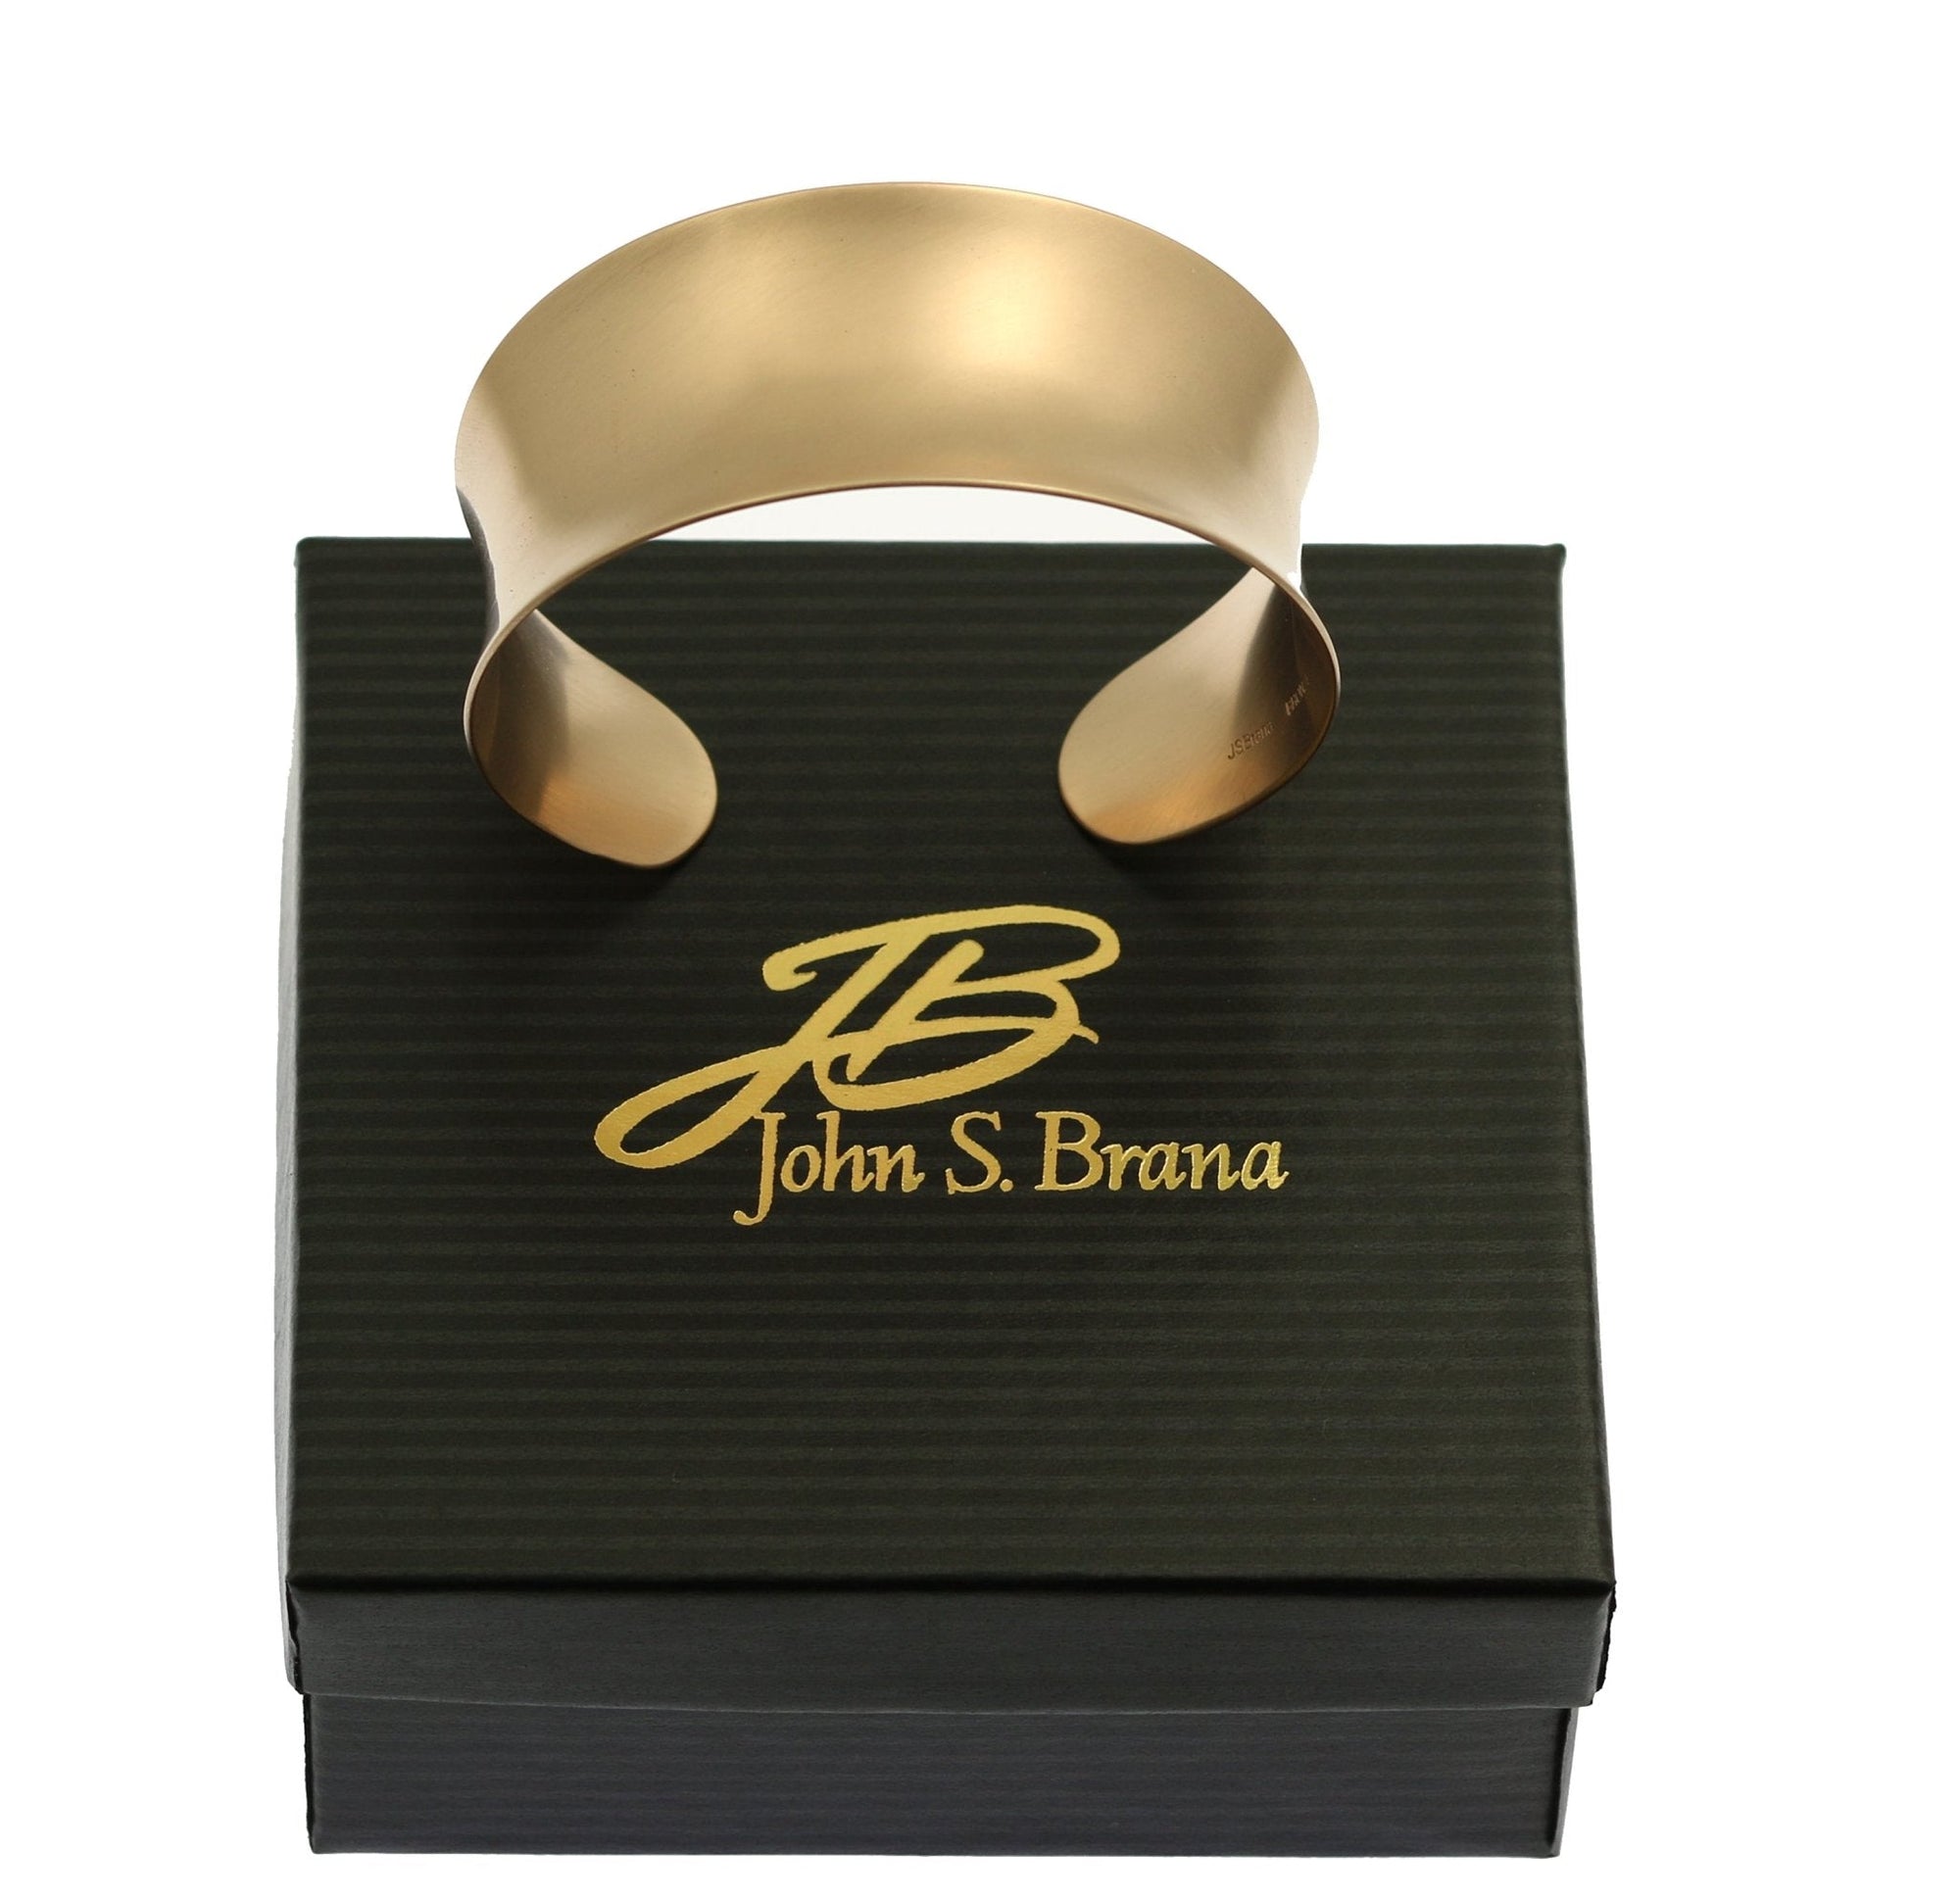 Brushed Bronze Anticlastic Cuff on Branded Gift Box